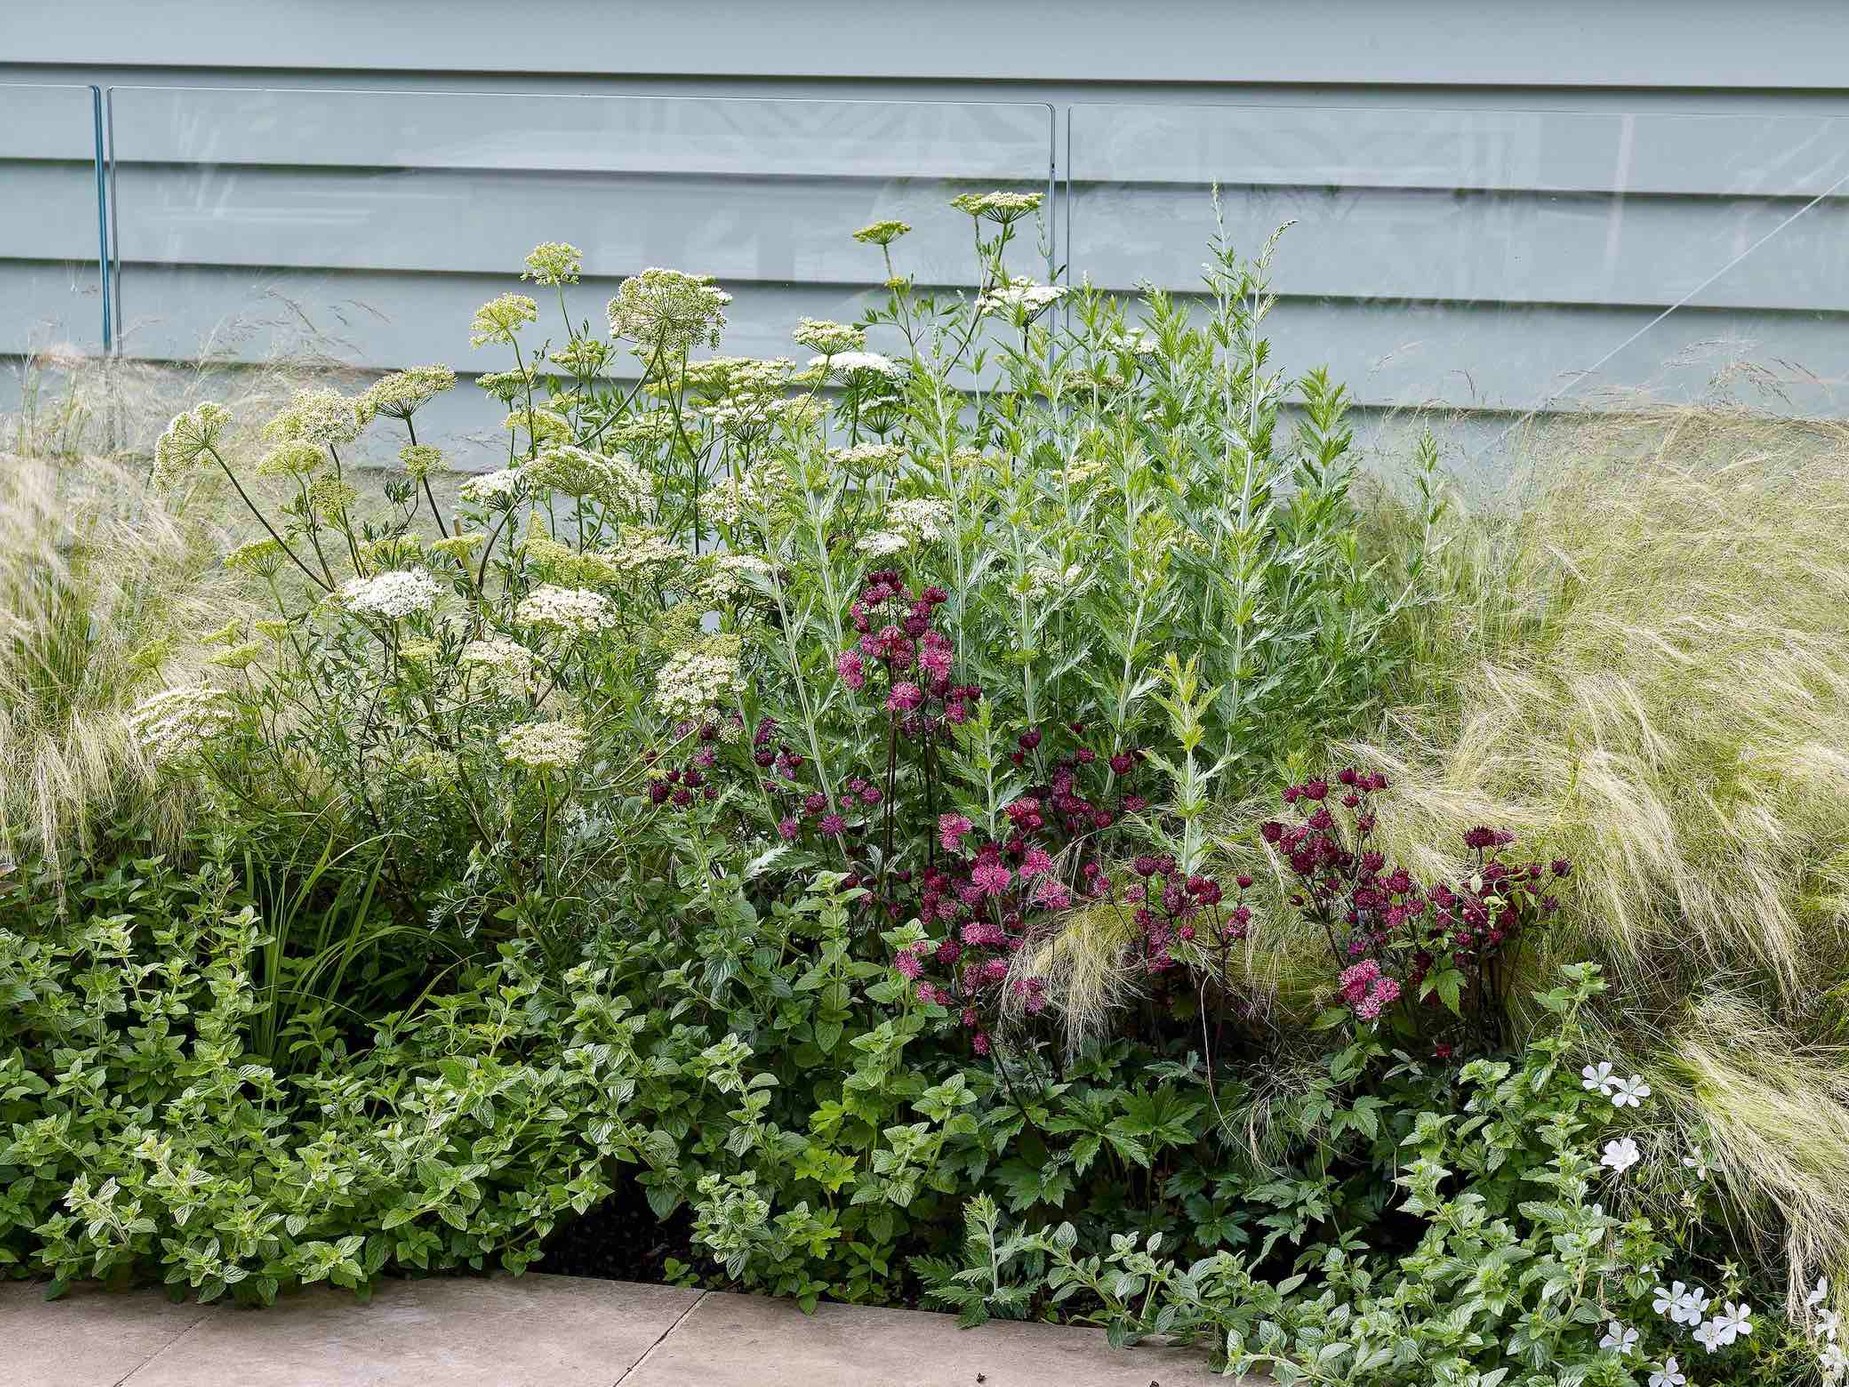 The sunny border, which runs alongside the glass balustrading for the basement extension, holds a soft mix of planting that includes Stipa tenuissima, Astrantia ‘Ruby Star’ and Geranium sanguineum ‘Album’ offering a long season of interest without blocking out light to the basement.